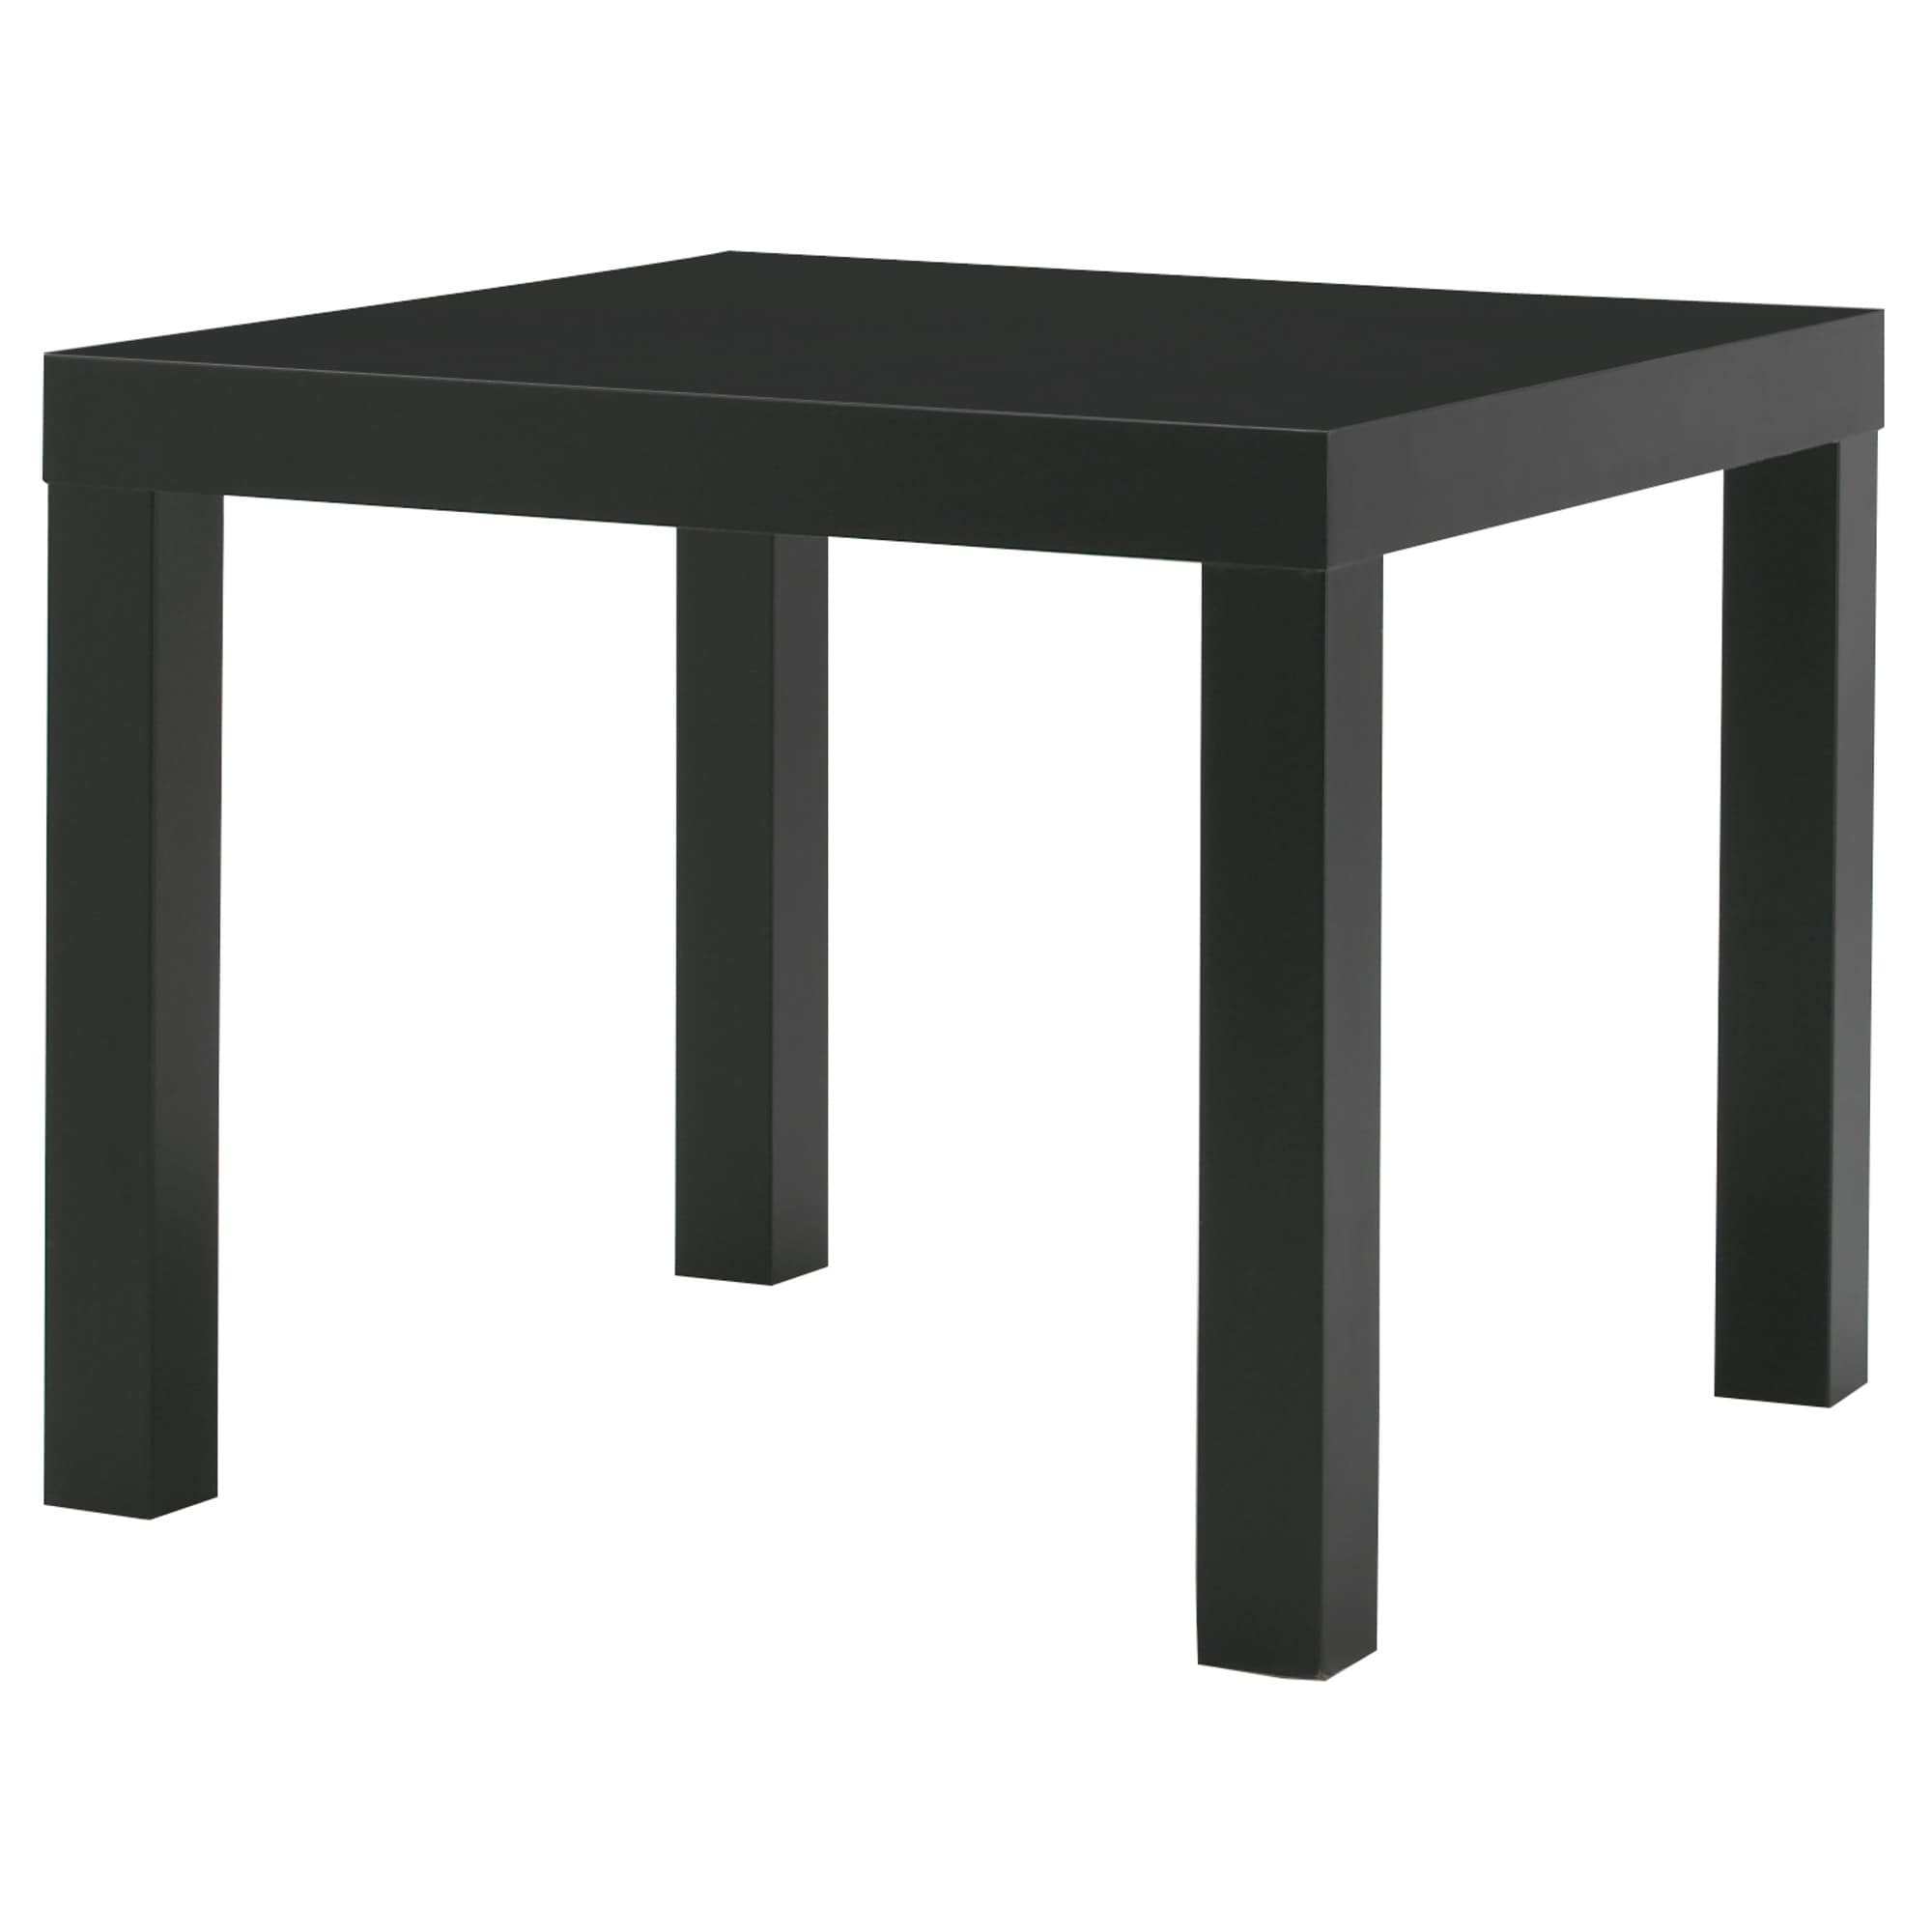 lack side table black ikea corner accent end tables for small rooms nightstand height wooden outdoor cooler wood pedestal stand coastal inspired lamps target wall decor west elm